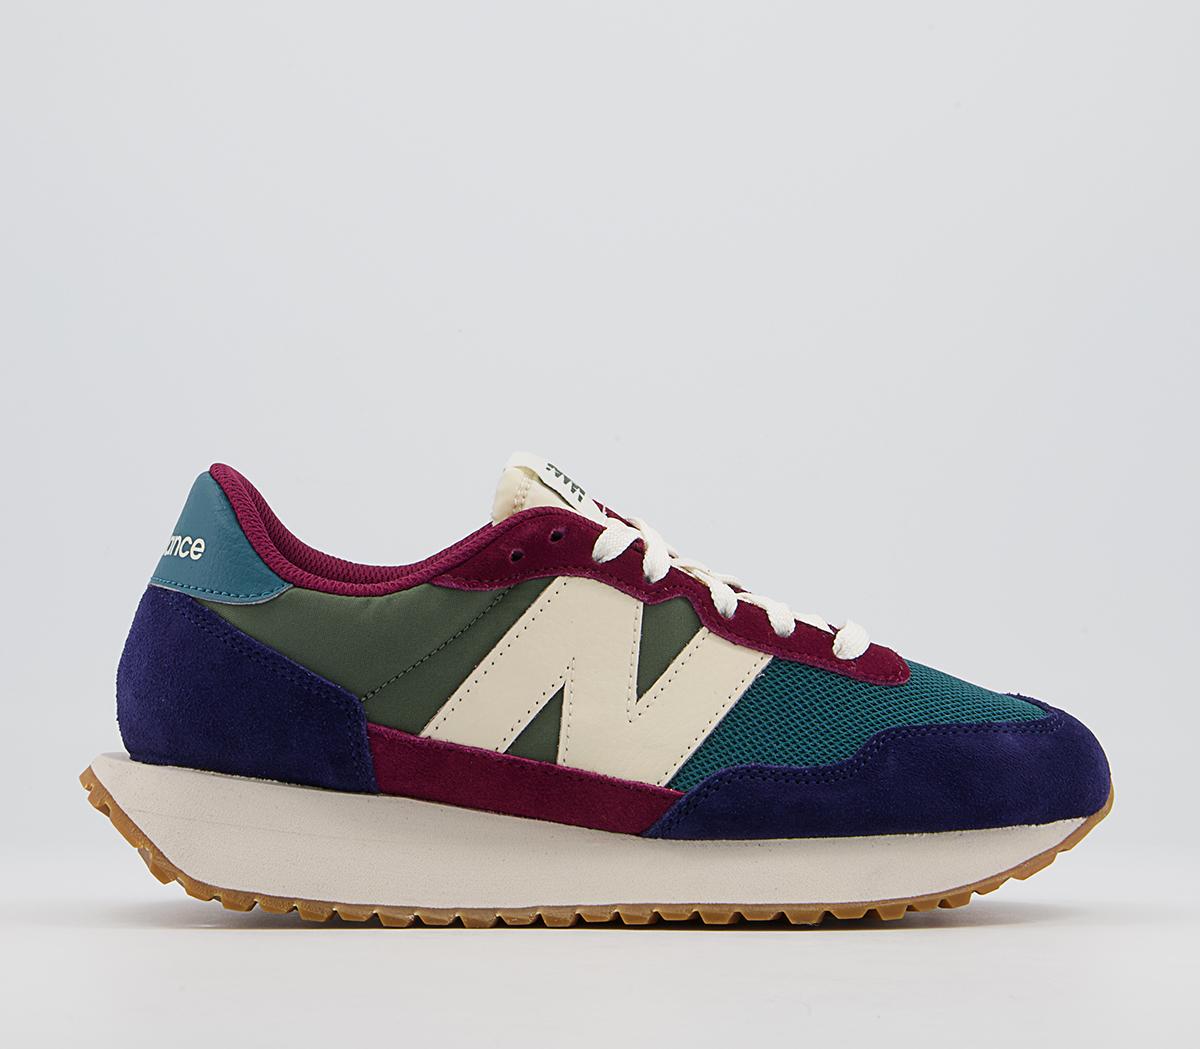 New Ws237 Trainers Blue Green Burgundy - Women's Trainers